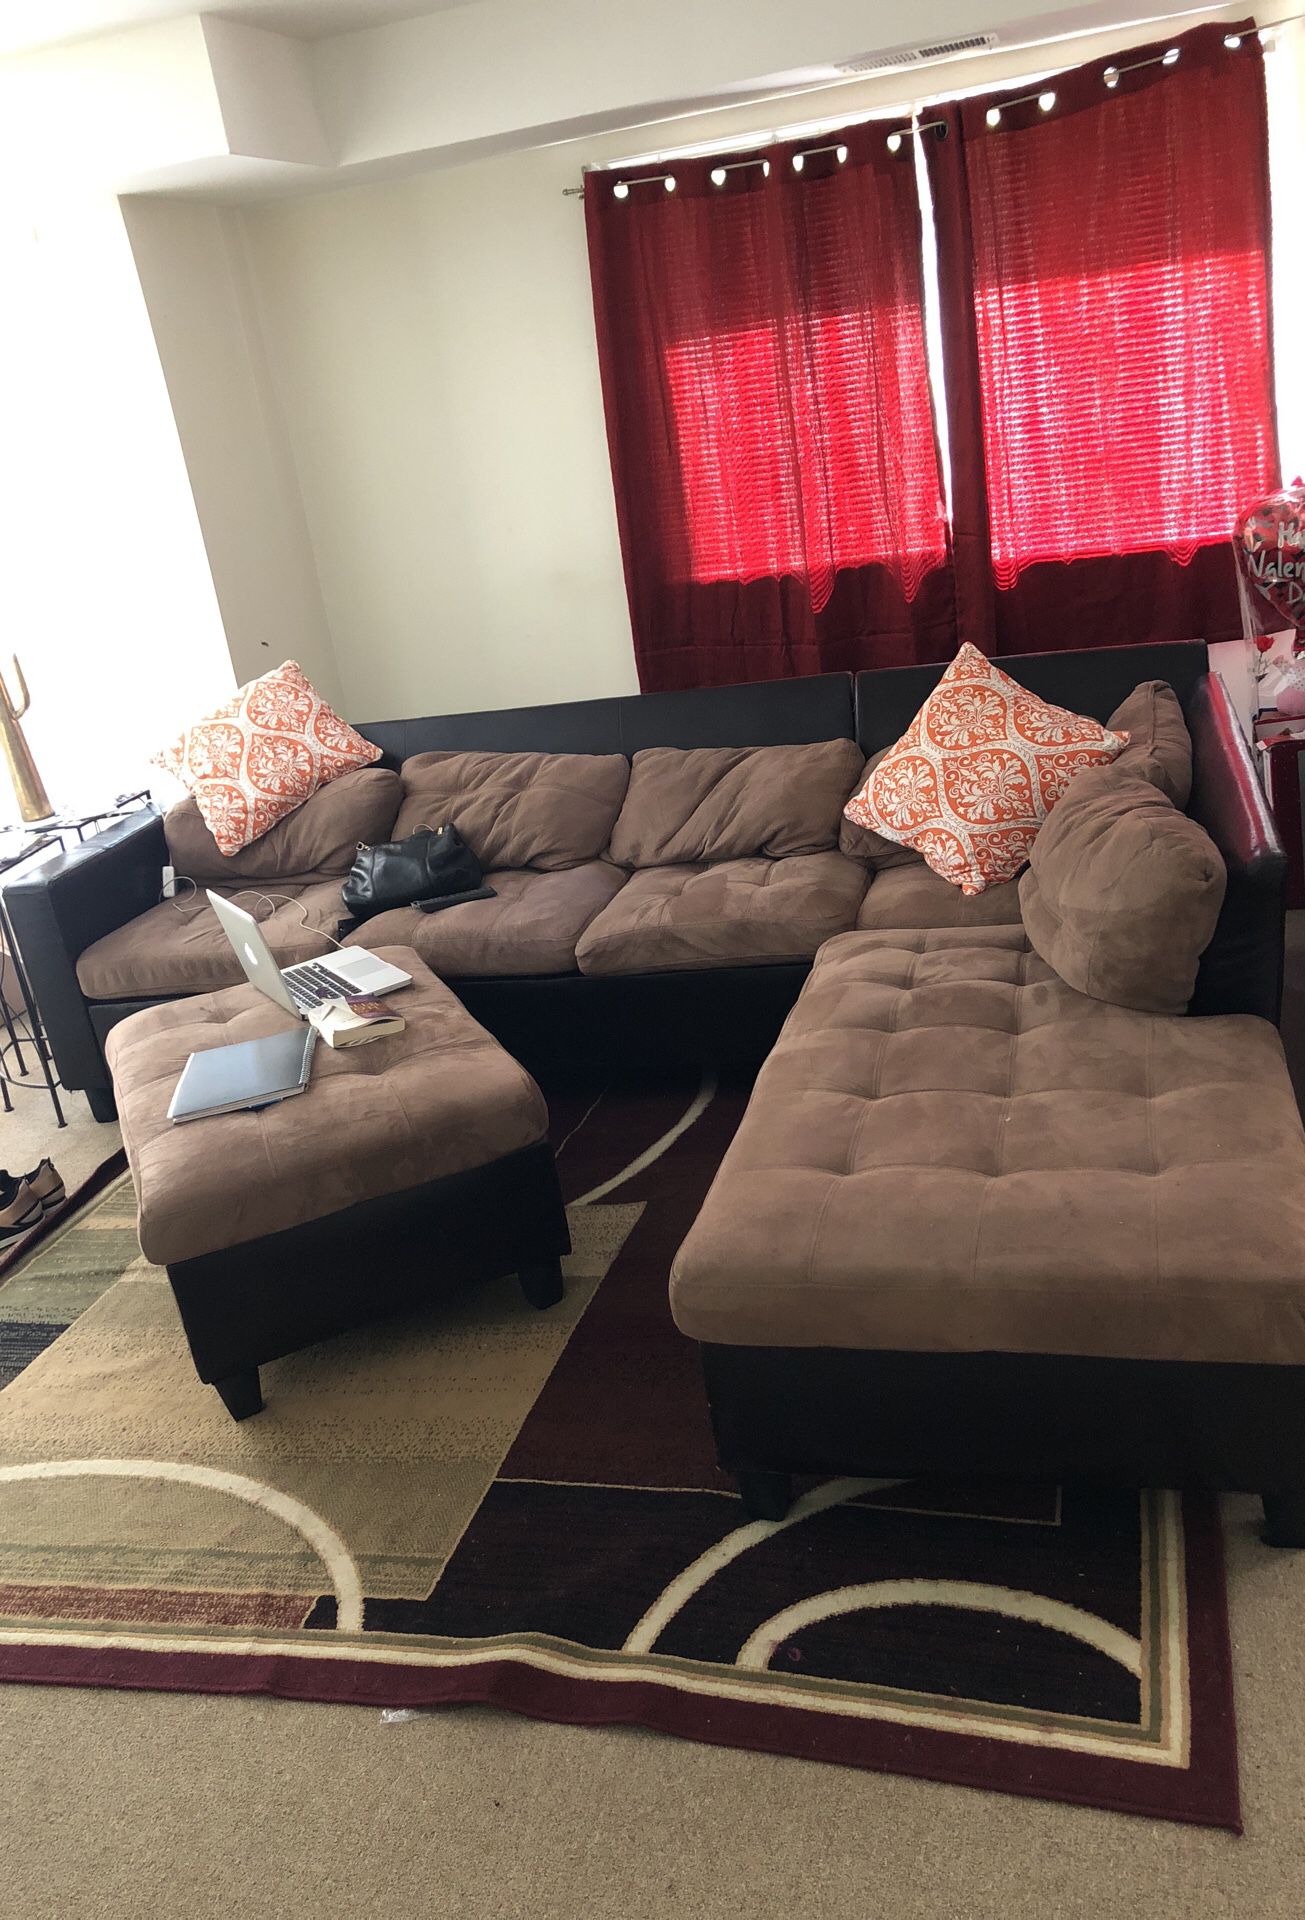 Sectional futon and carpet for sale